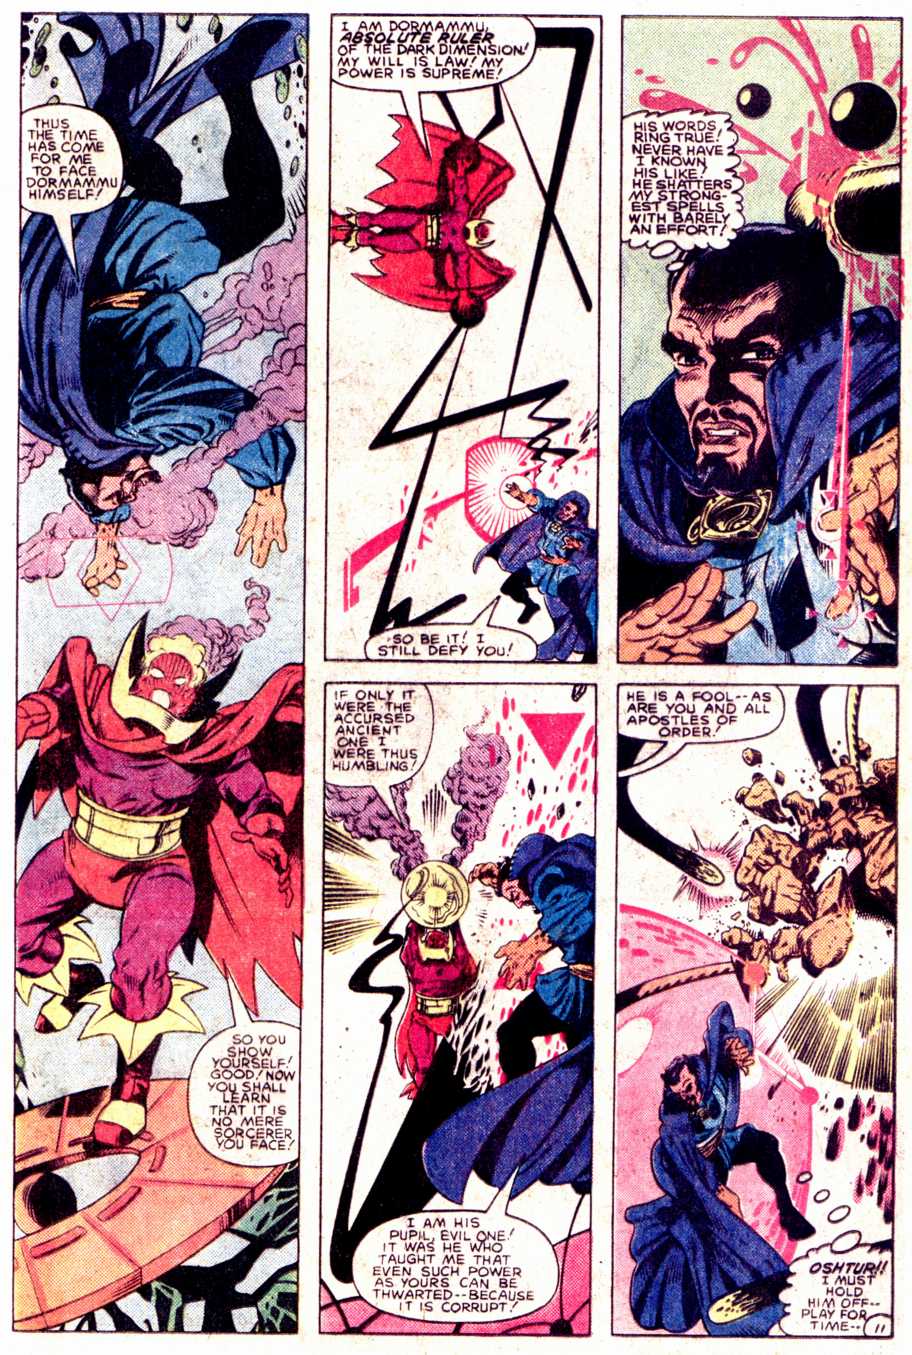 What If? (1977) issue 40 - Dr Strange had not become master of The mystic arts - Page 12